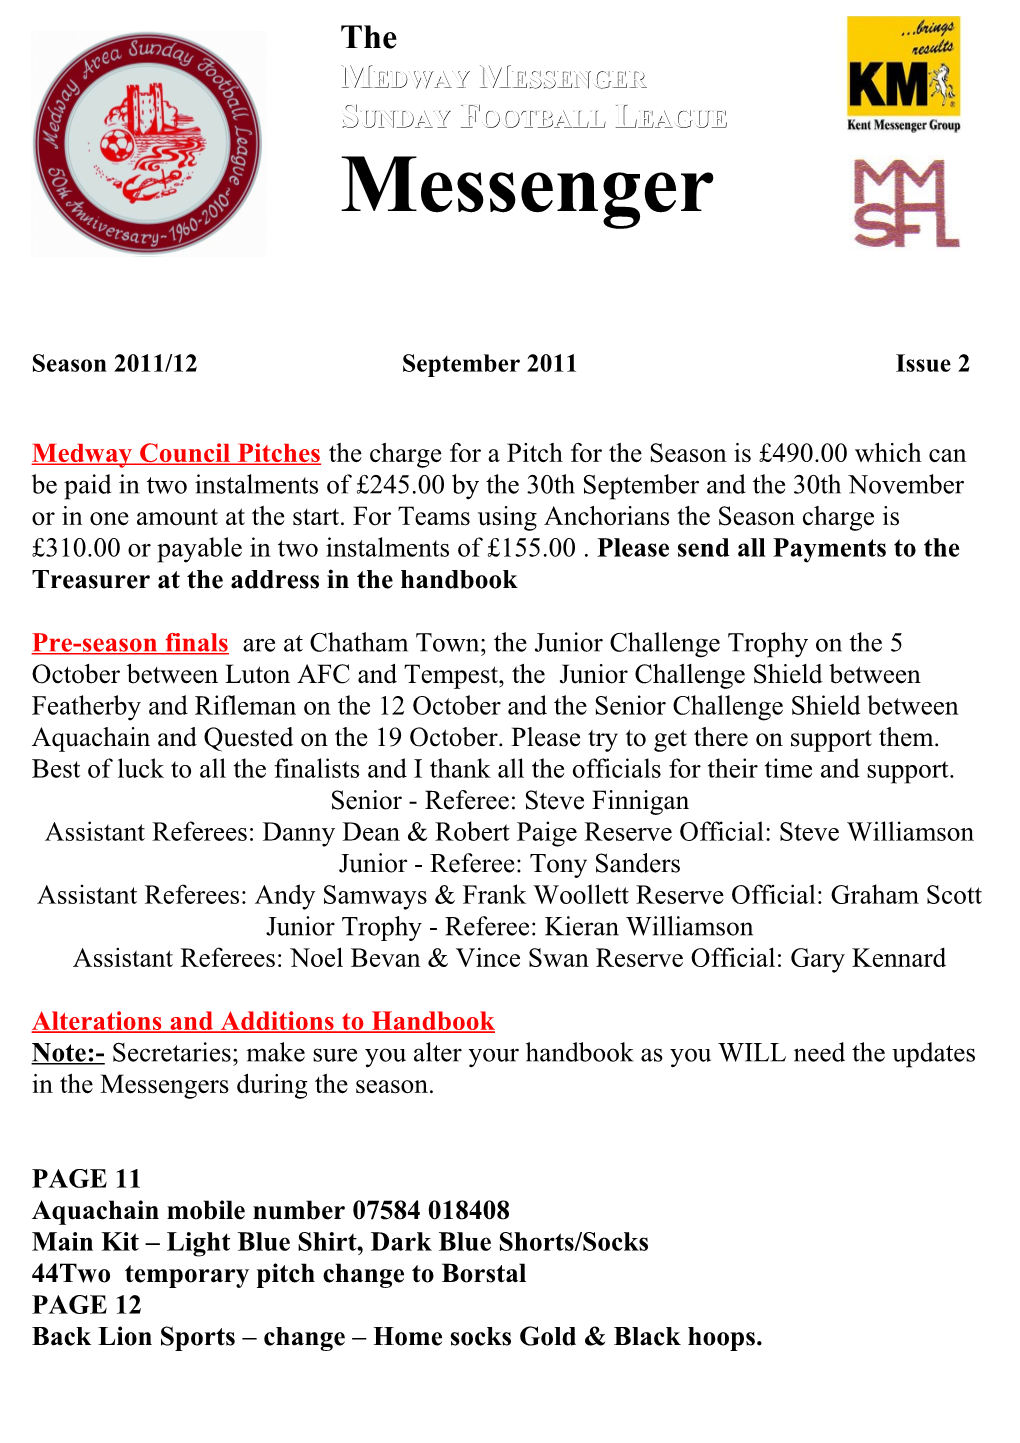 Medway Council Pitches the Charge for a Pitch for the Season Is 490.00 Which Can Be Paid